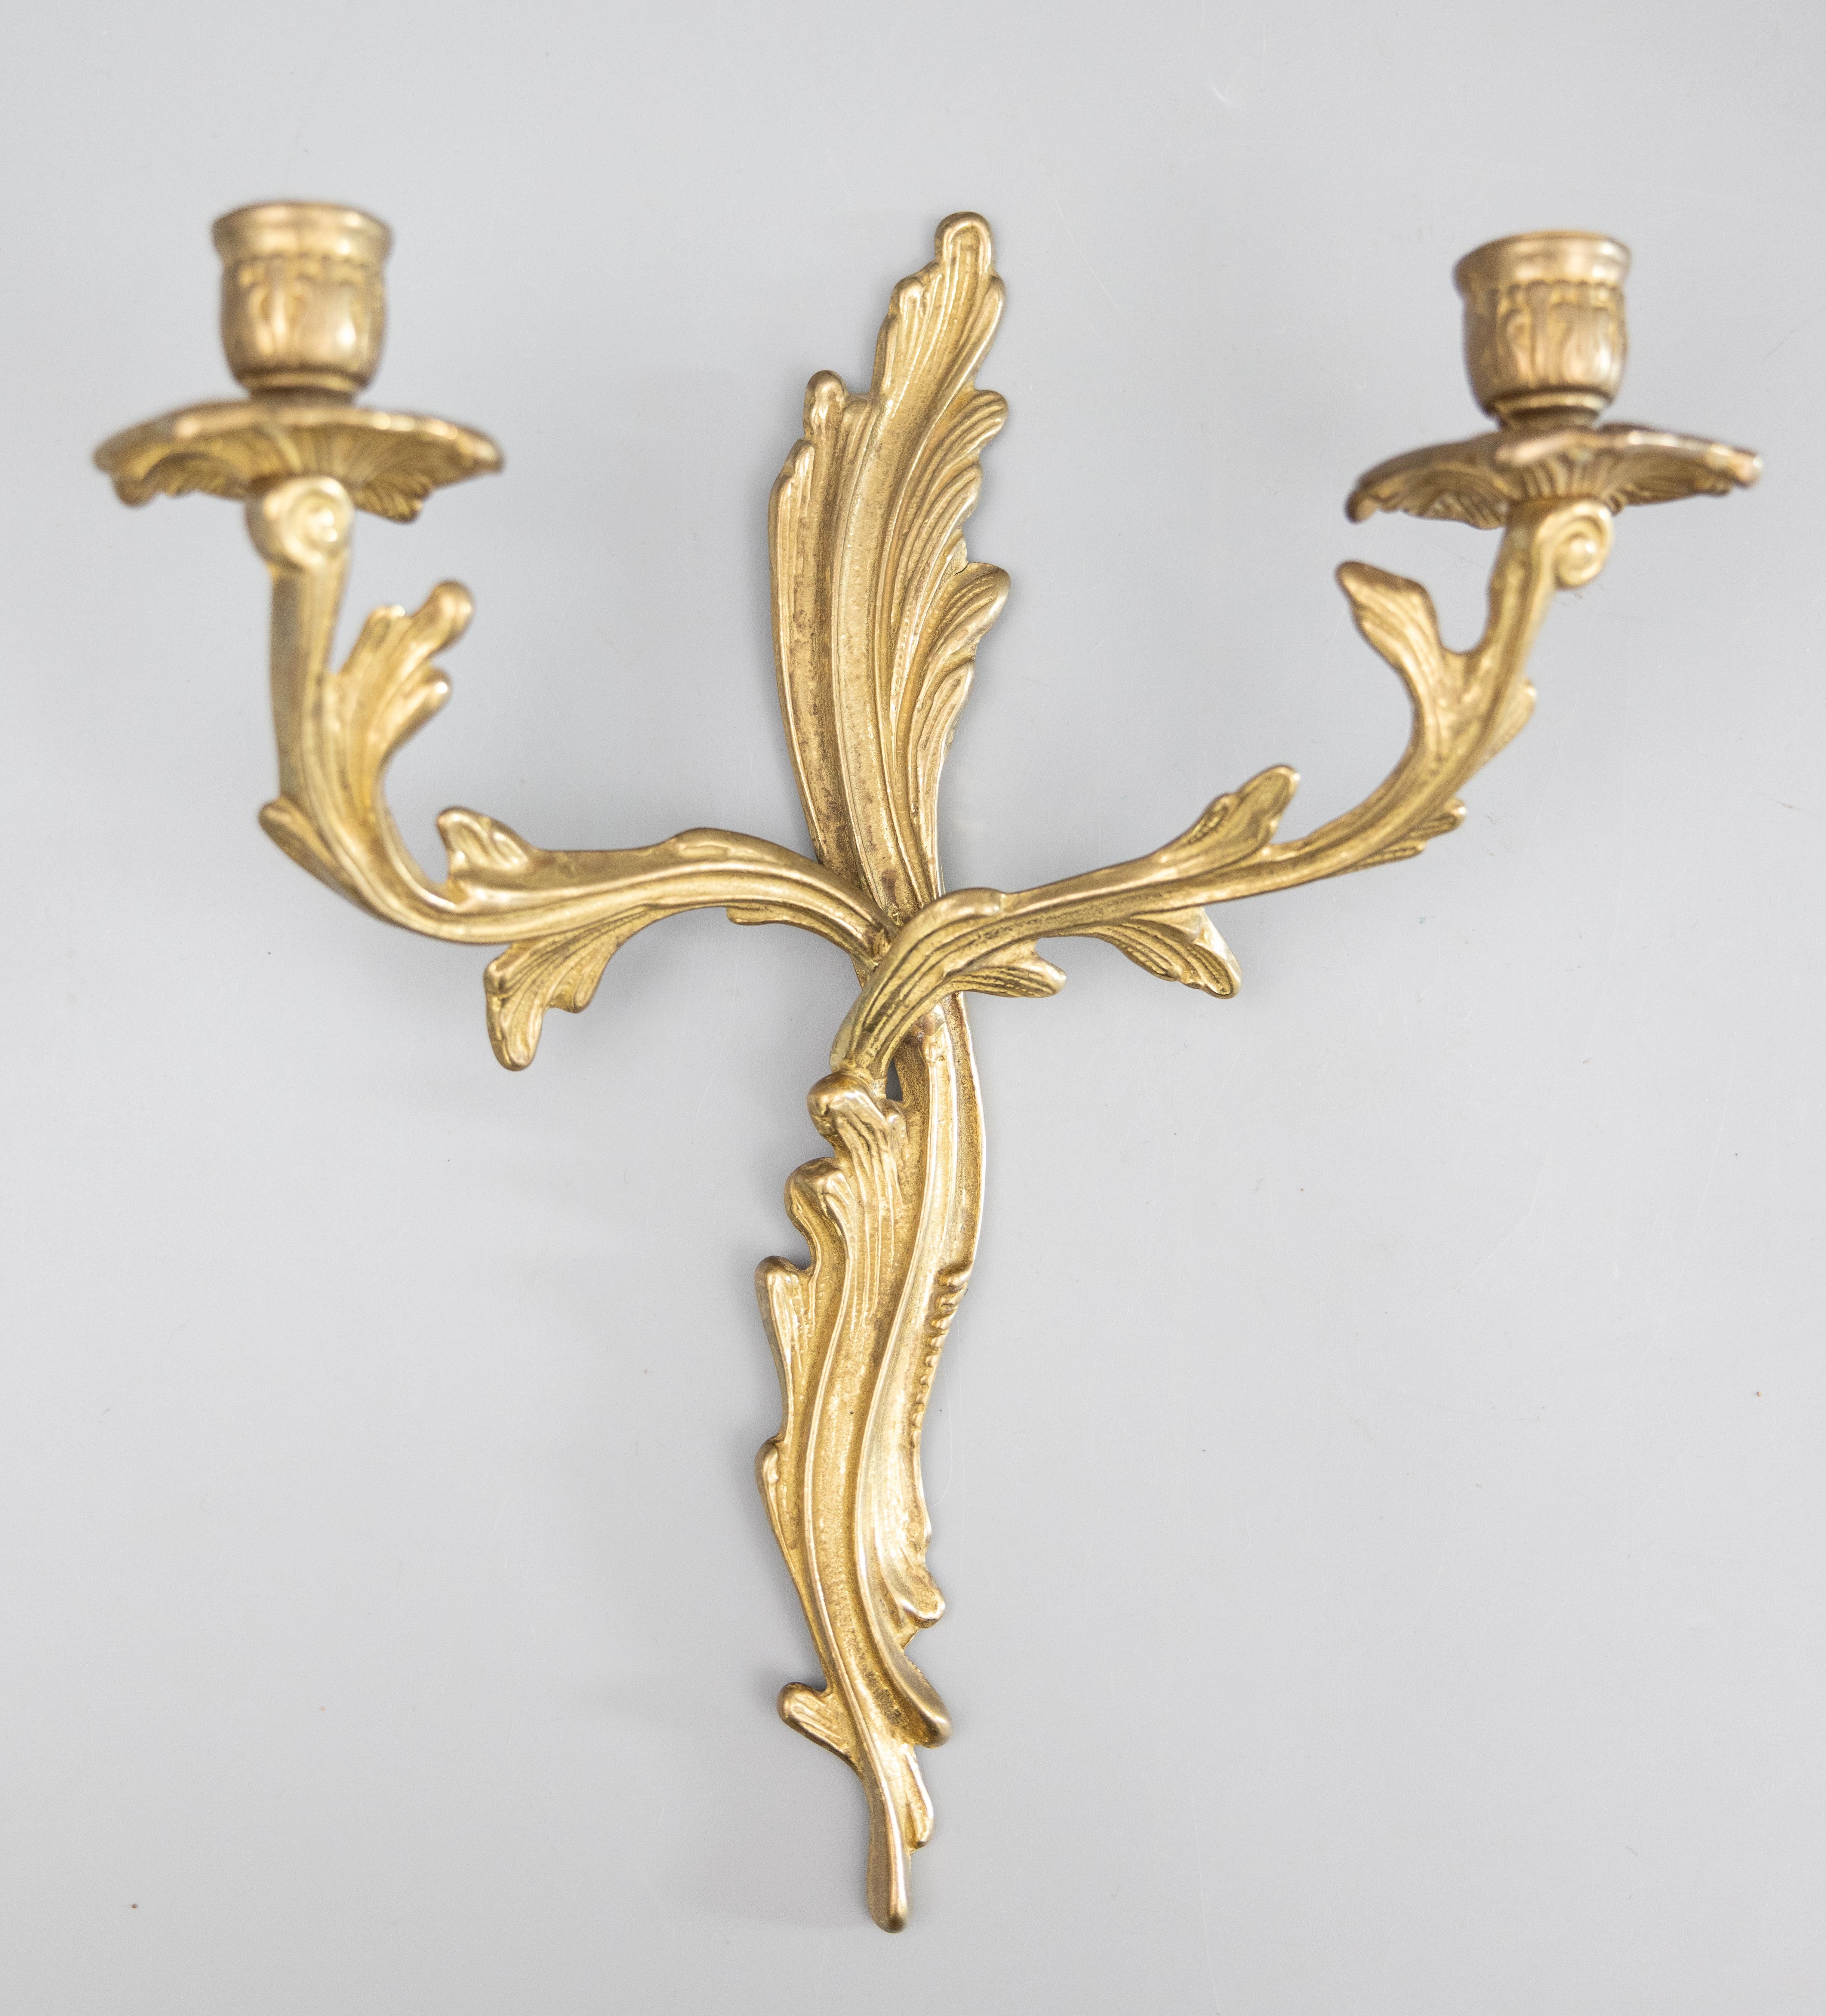 Pair of Antique French Rococo Style Gilt Brass Candelabras Wall Candle Sconces In Good Condition For Sale In Pearland, TX